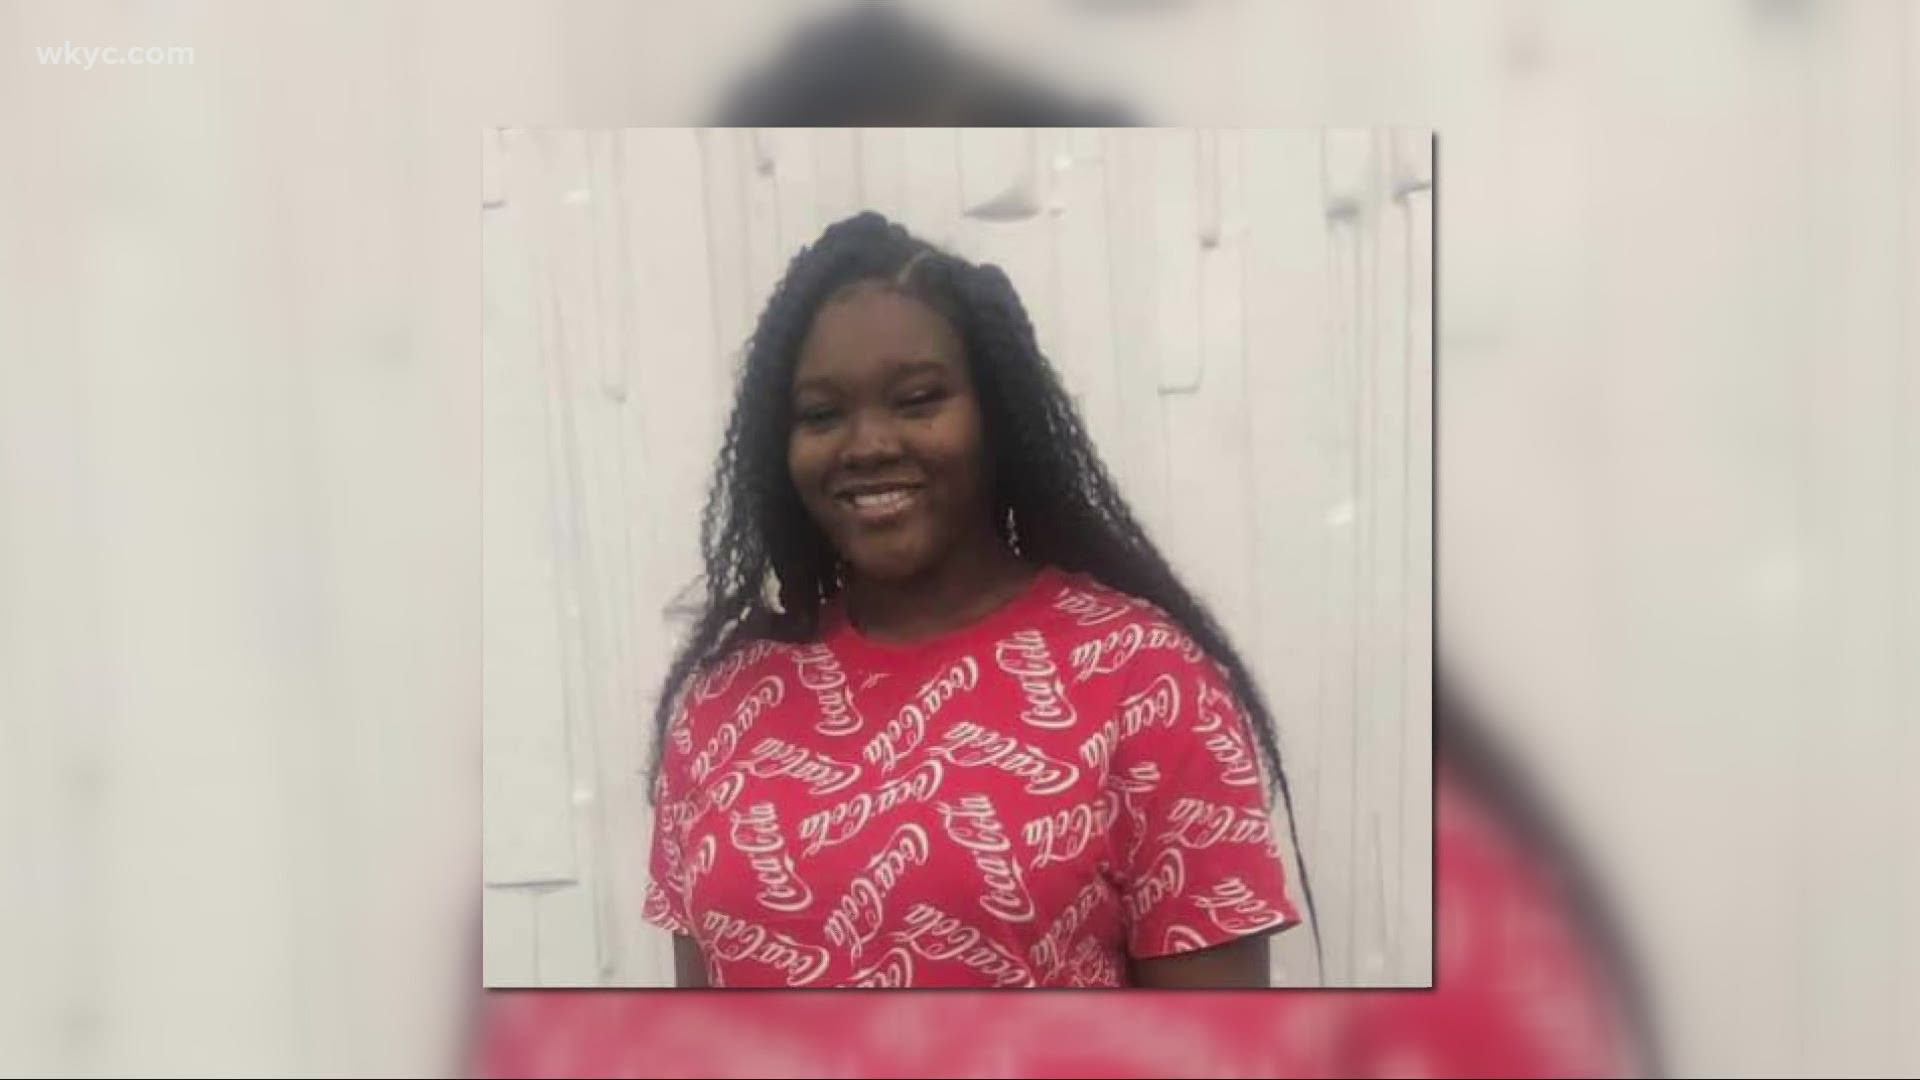 Na'Kia Crawford was fatally shot in Akron Sunday. Police need help finding her killer.